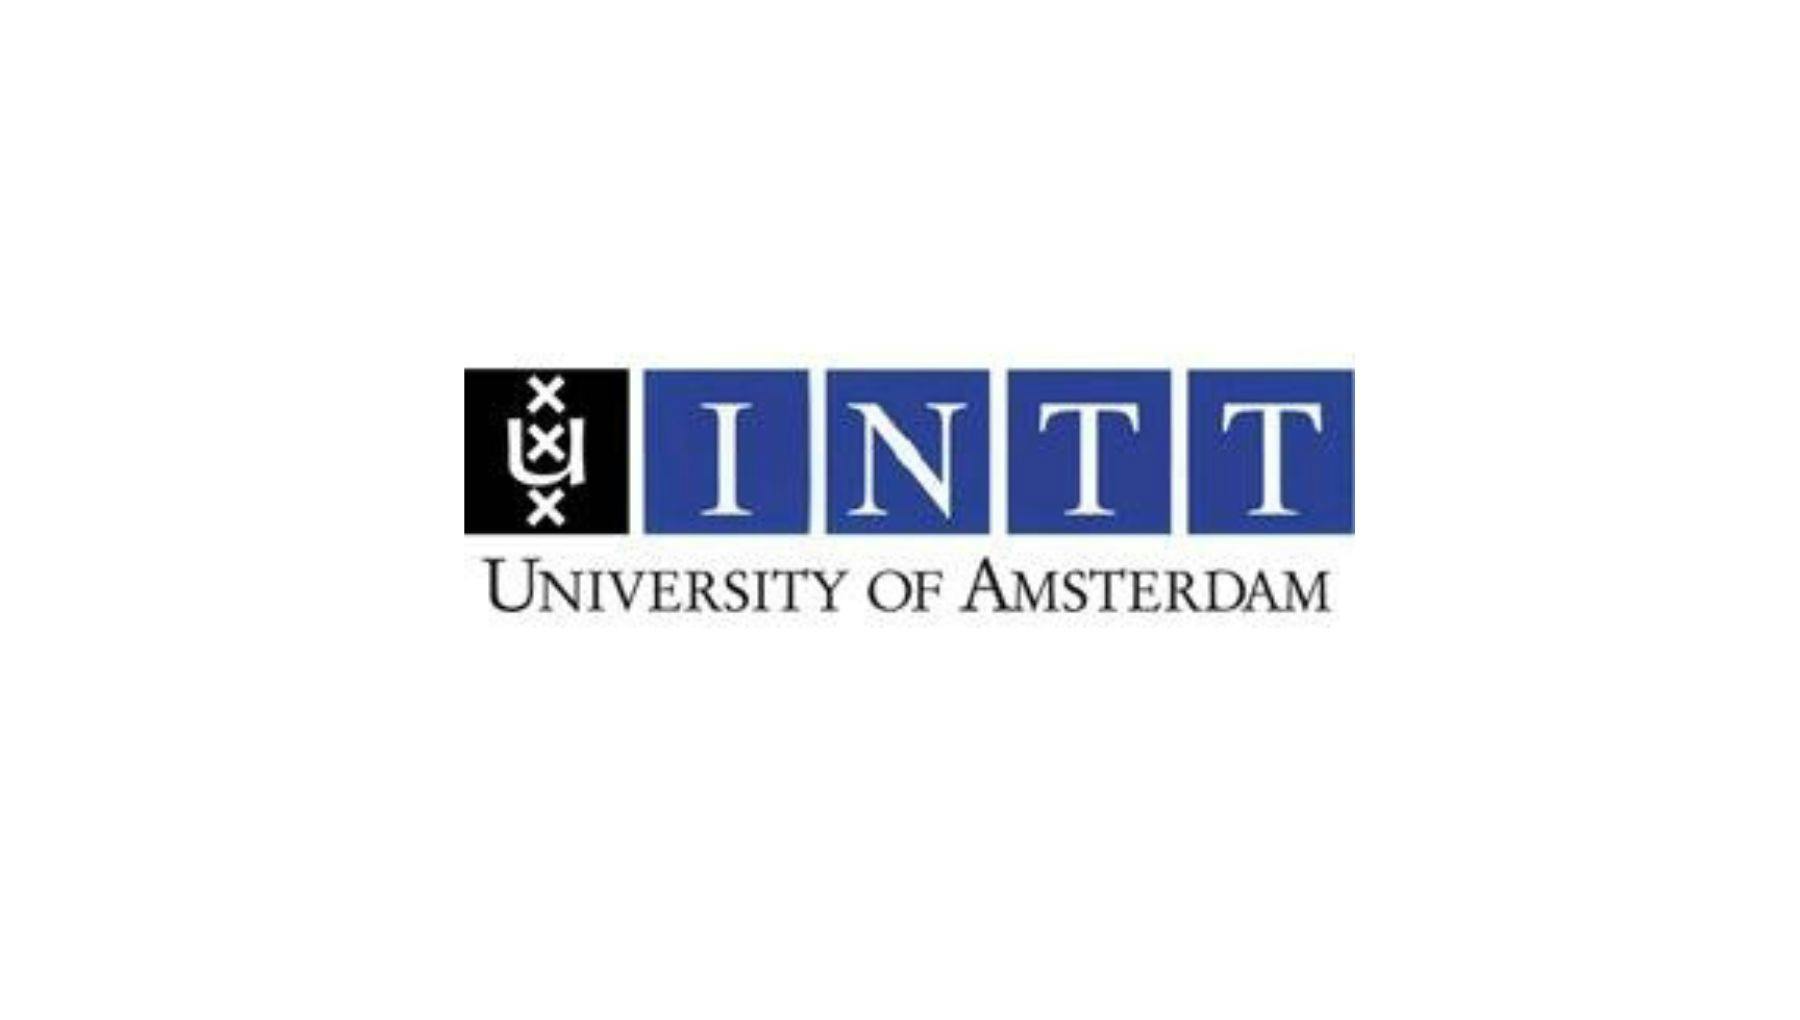 INTT ��� Institute for Dutch Language Education at the University of Amsterdam